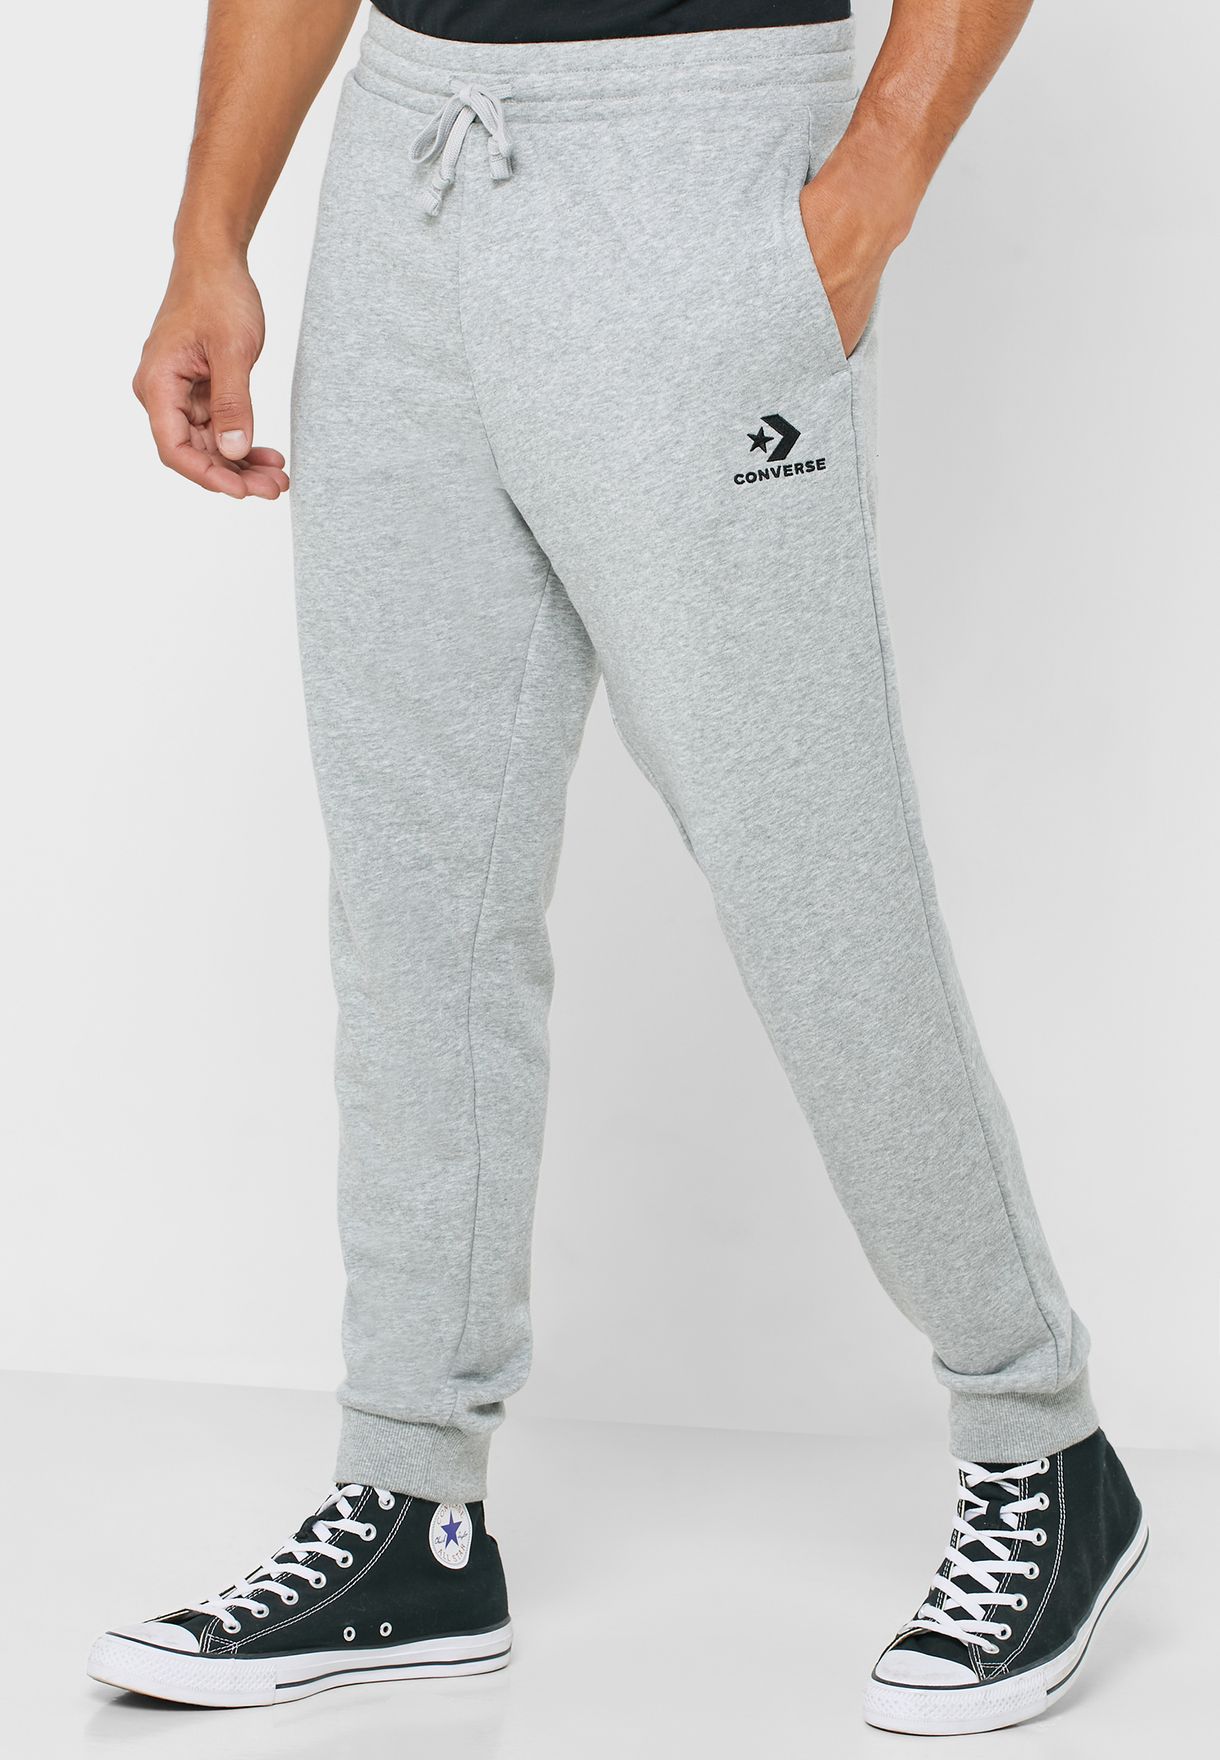 converse with sweatpants